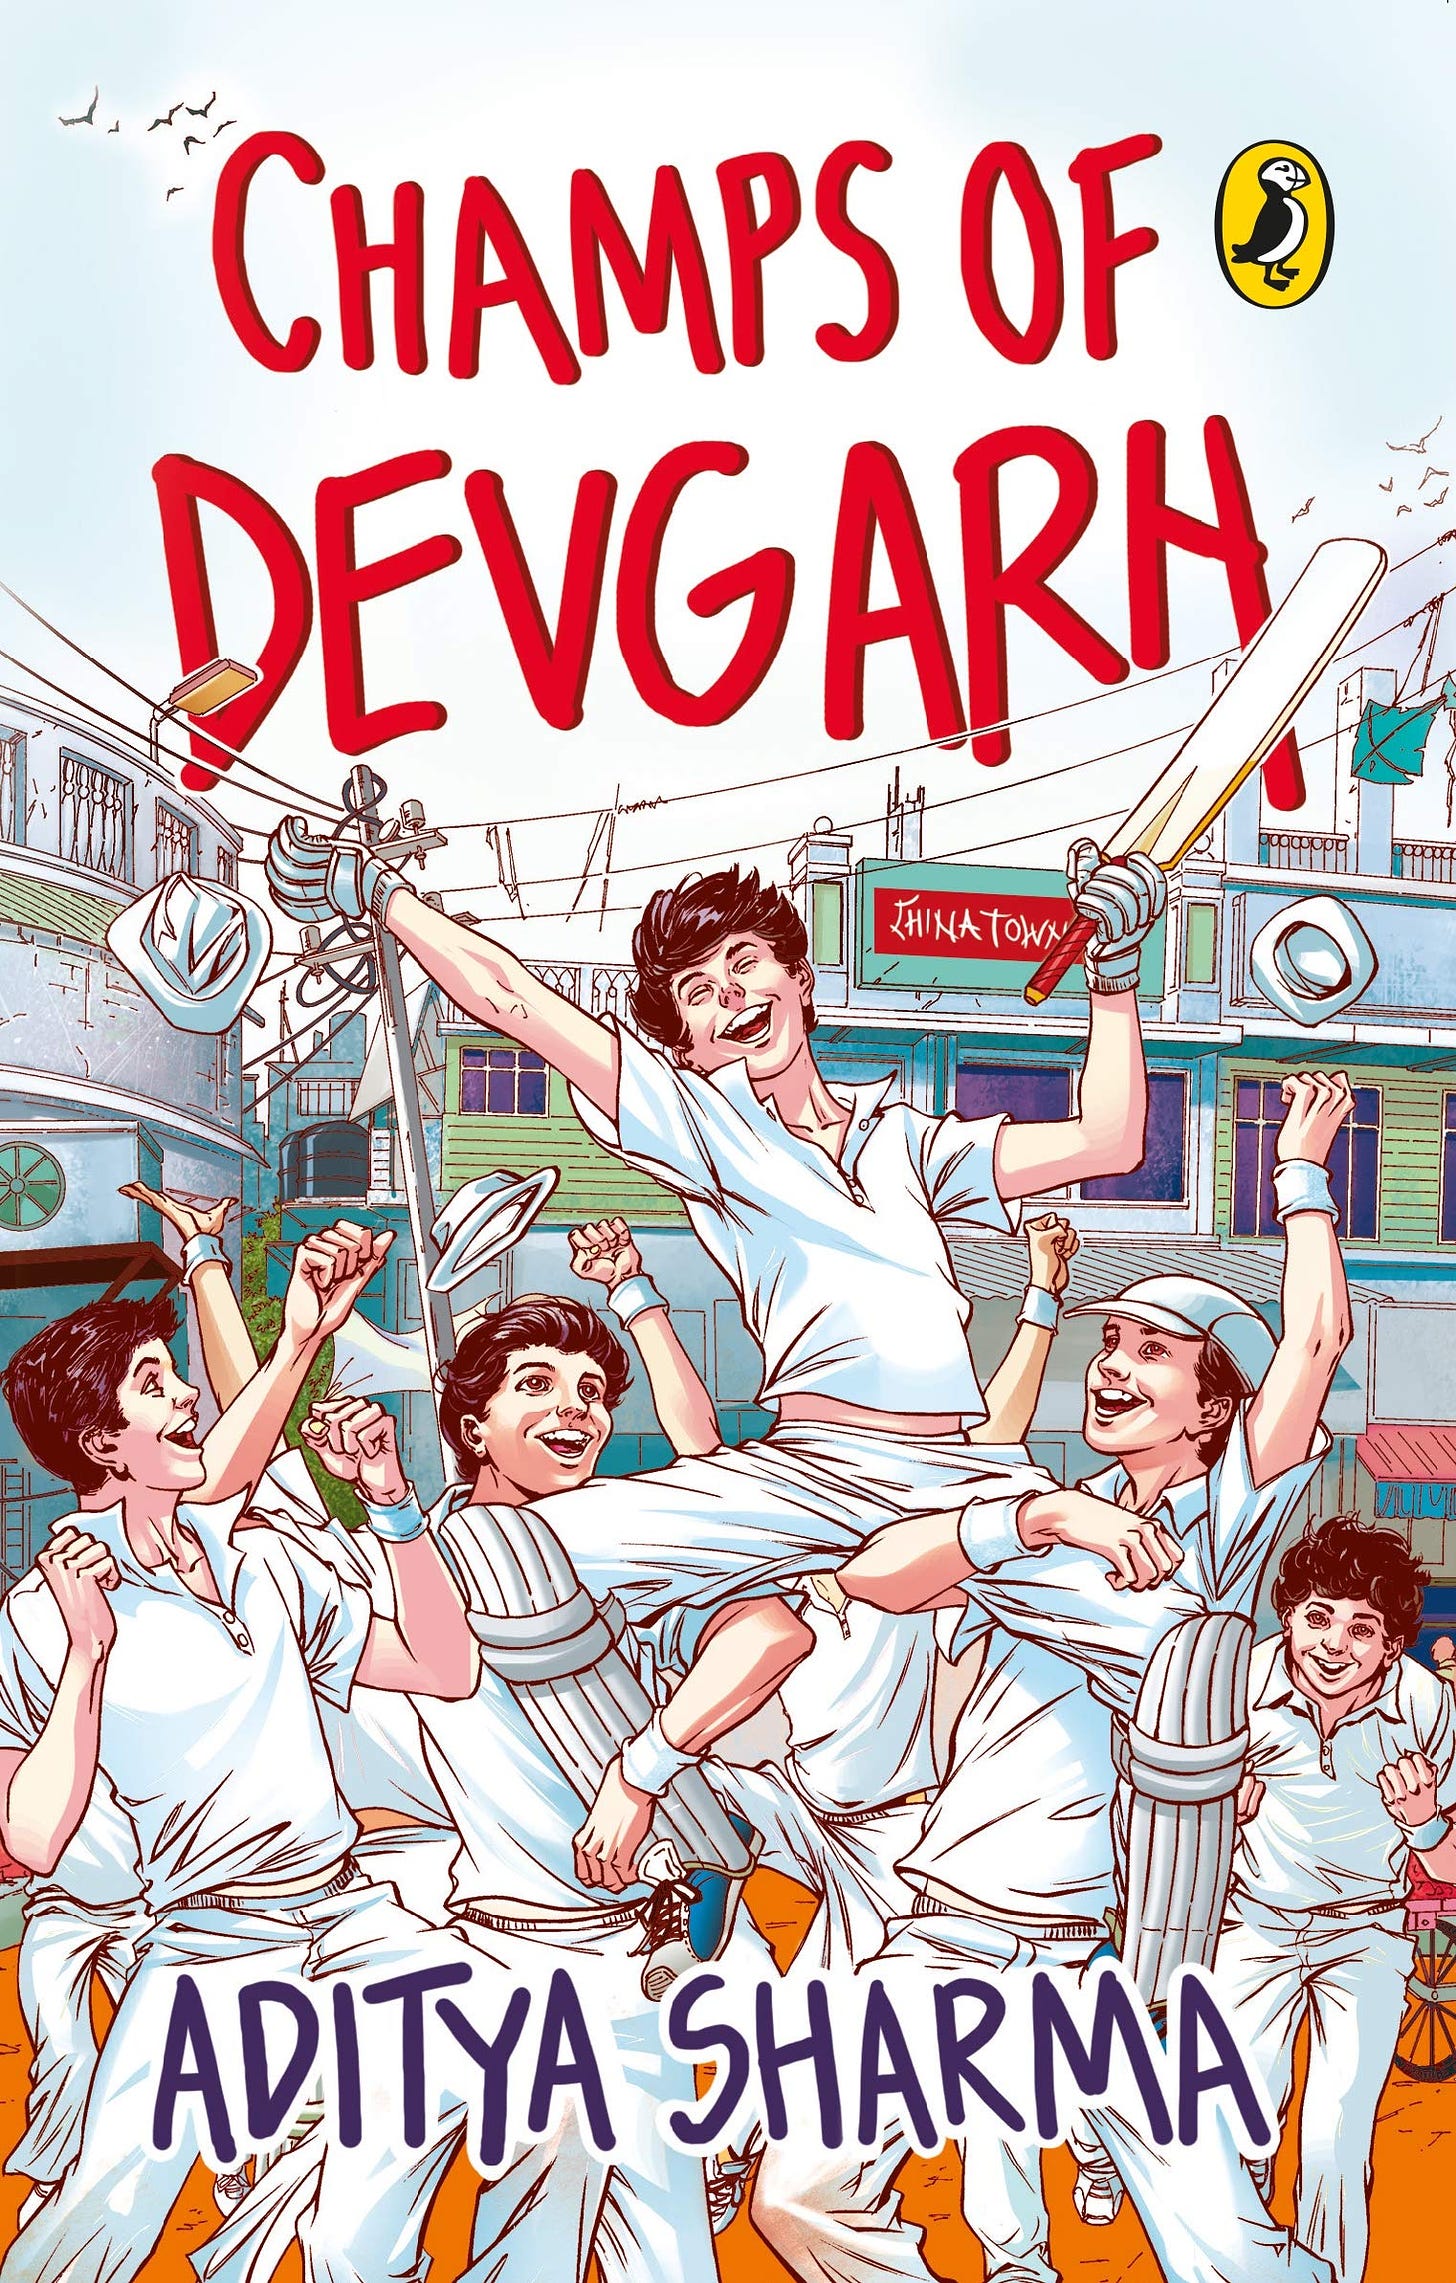 Buy Champs of Devgarh Book Online at Low Prices in India | Champs of Devgarh  Reviews & Ratings - Amazon.in